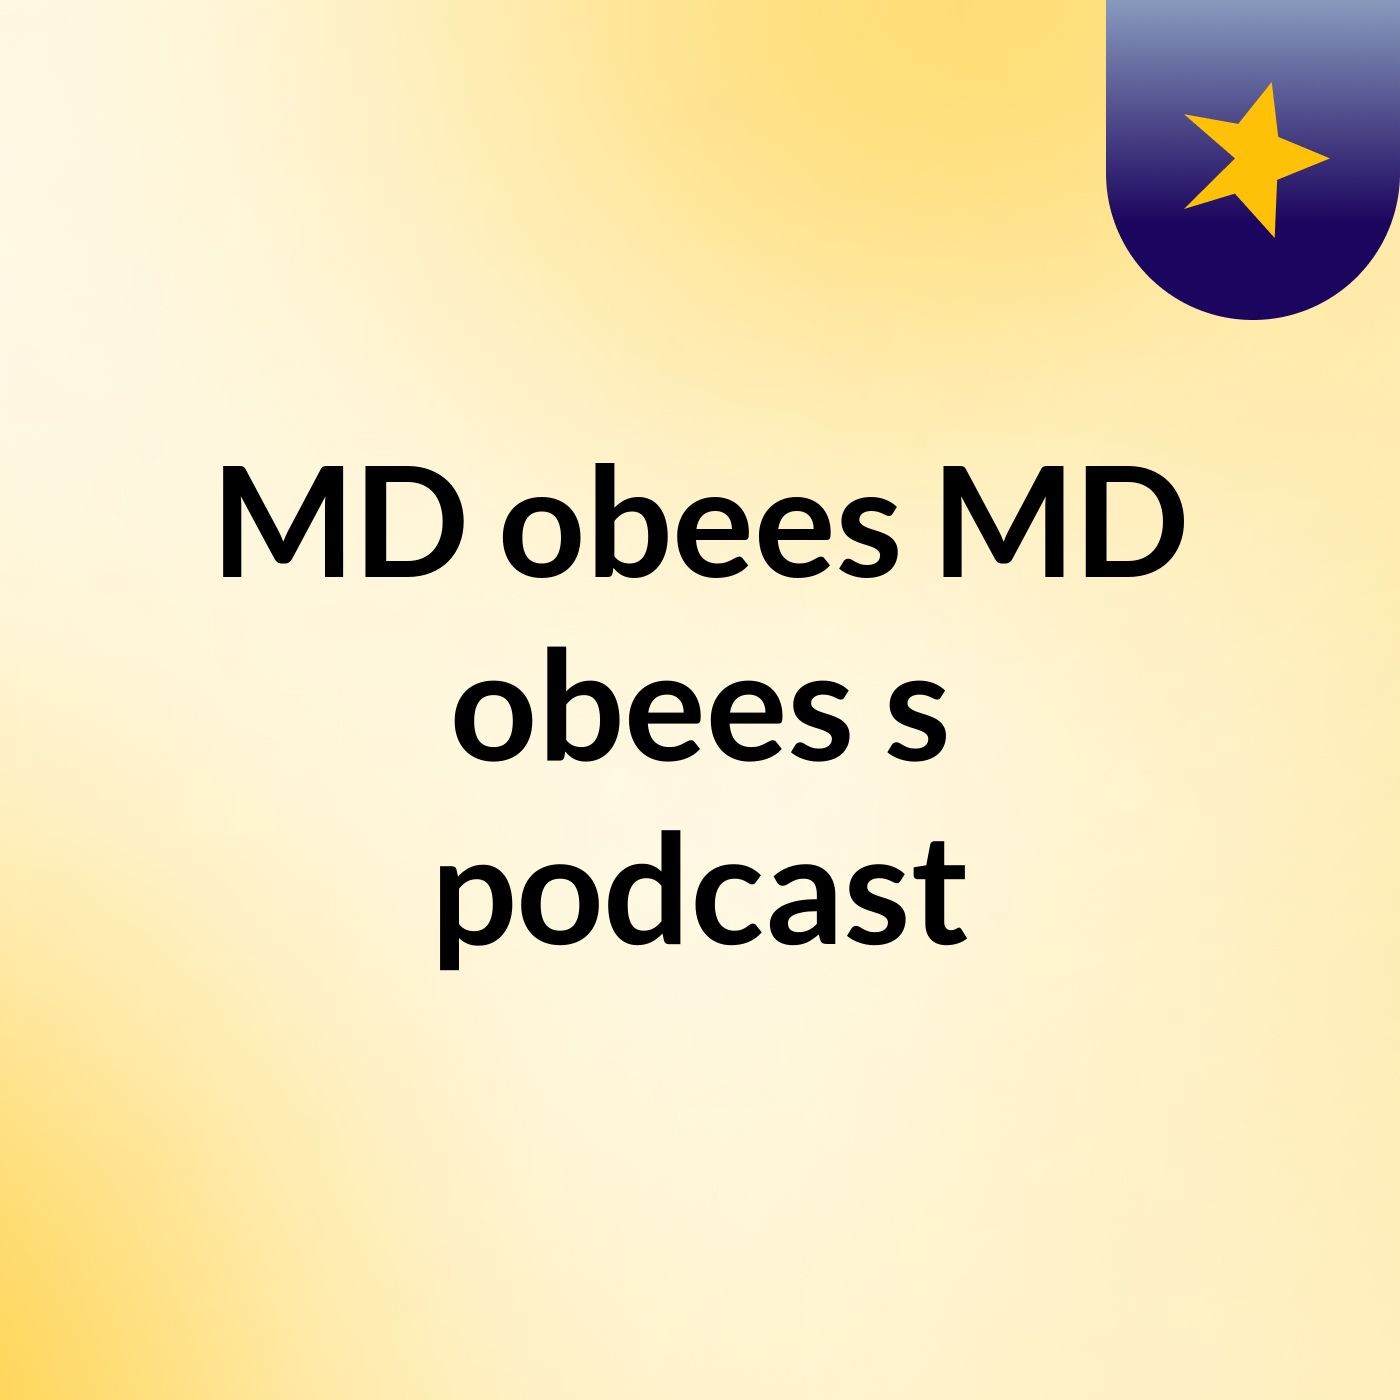 MD obees MD obees's podcast